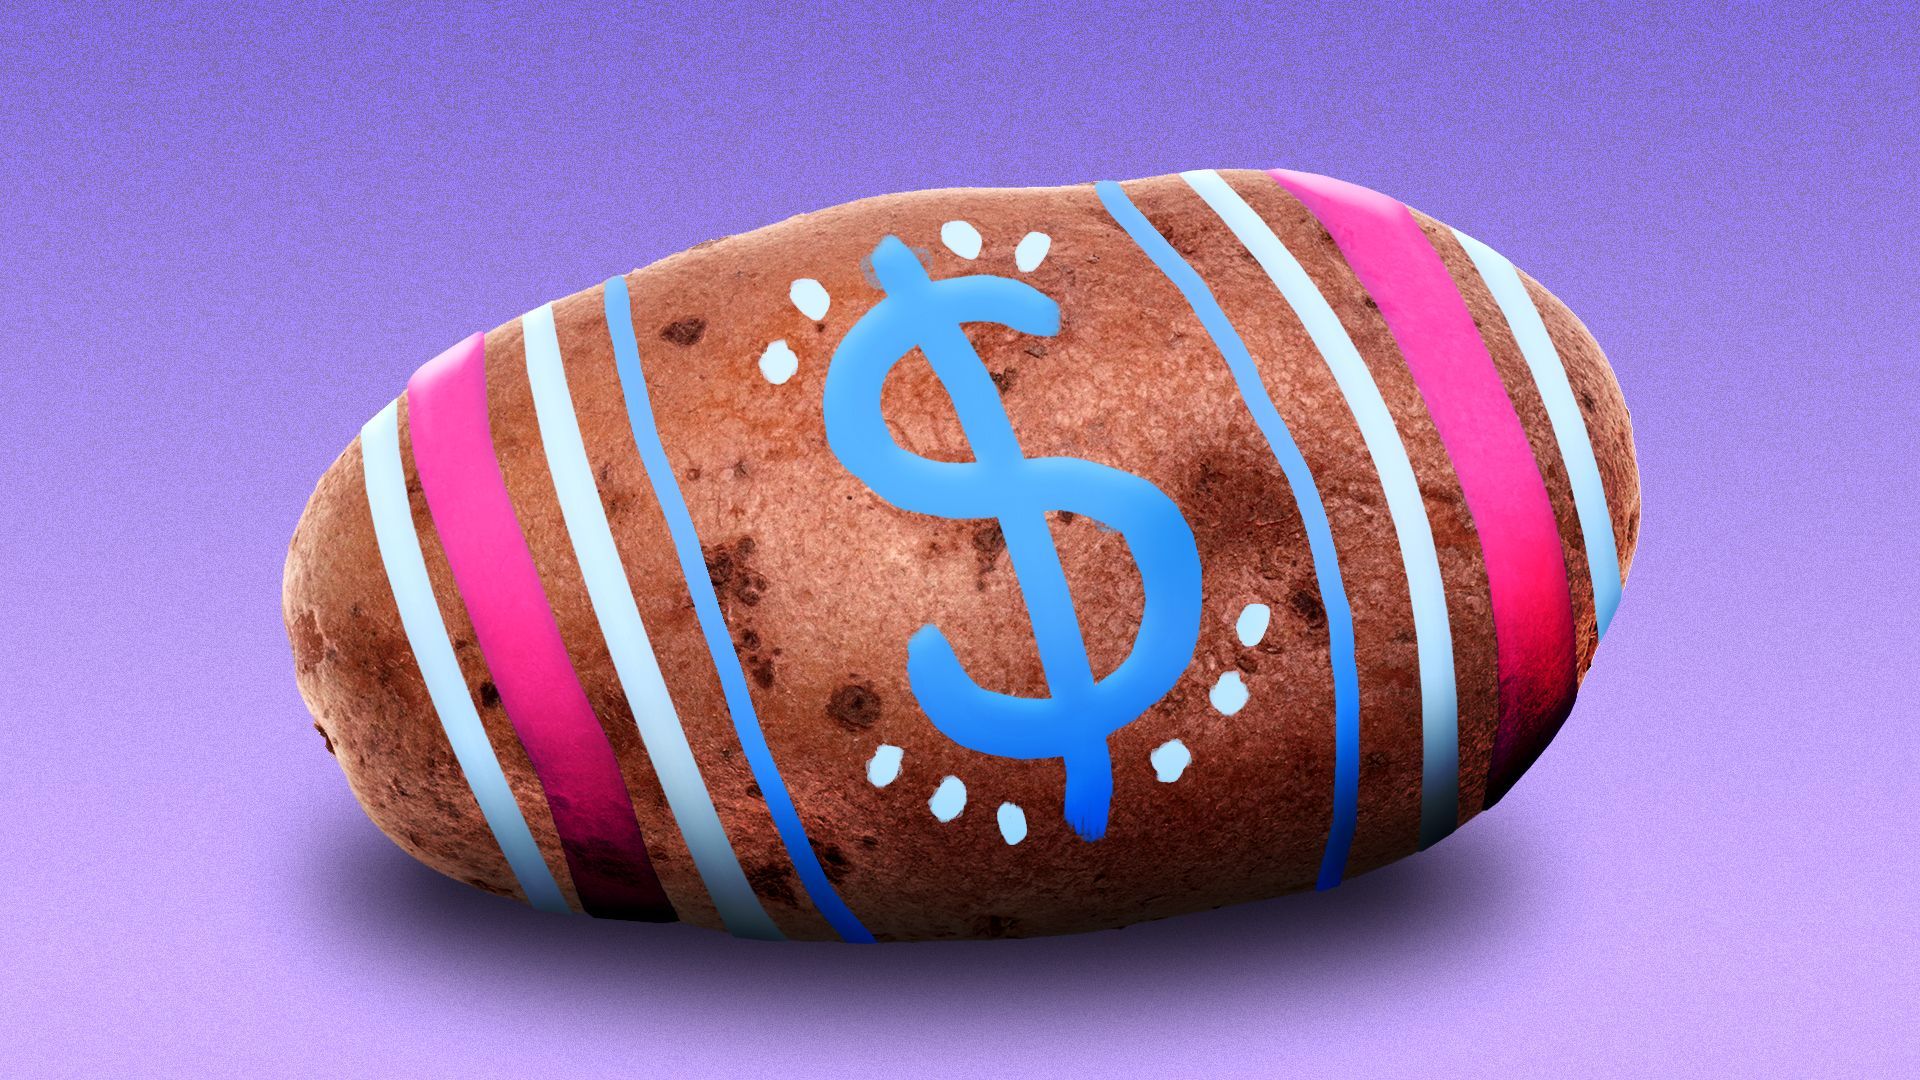  Illustration of a potato painted like an Easter egg with a dollar sign in the center of the design 